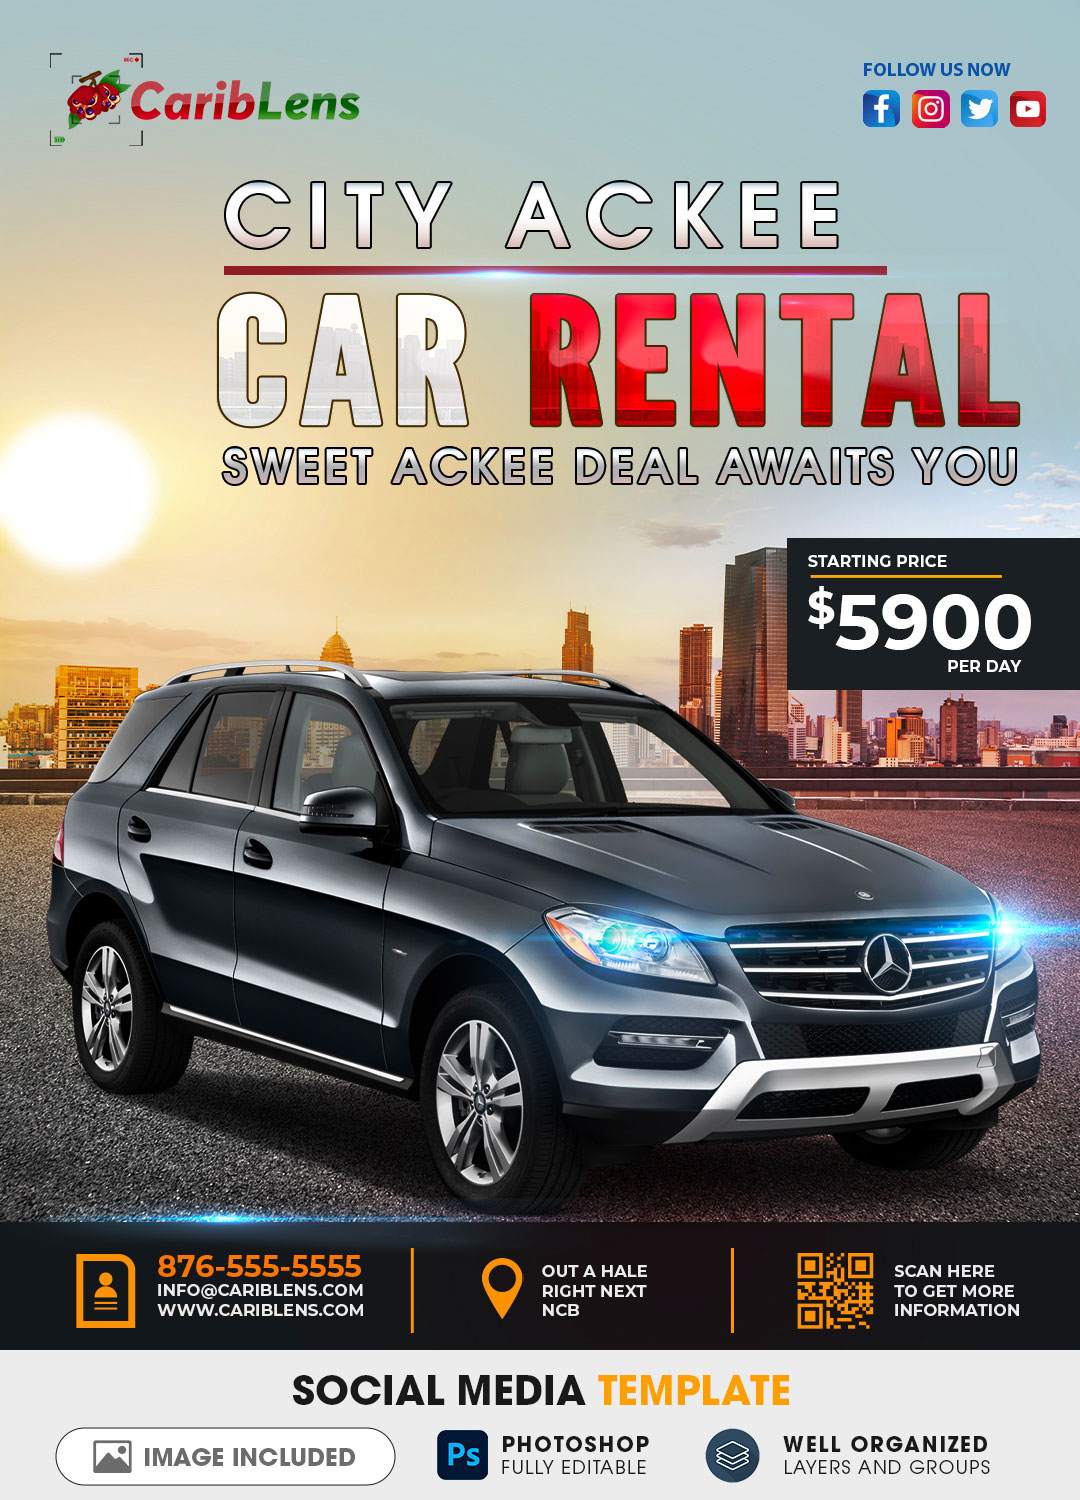 Big City Car Rental And Promotional Flyer And Post For Social Media Copy